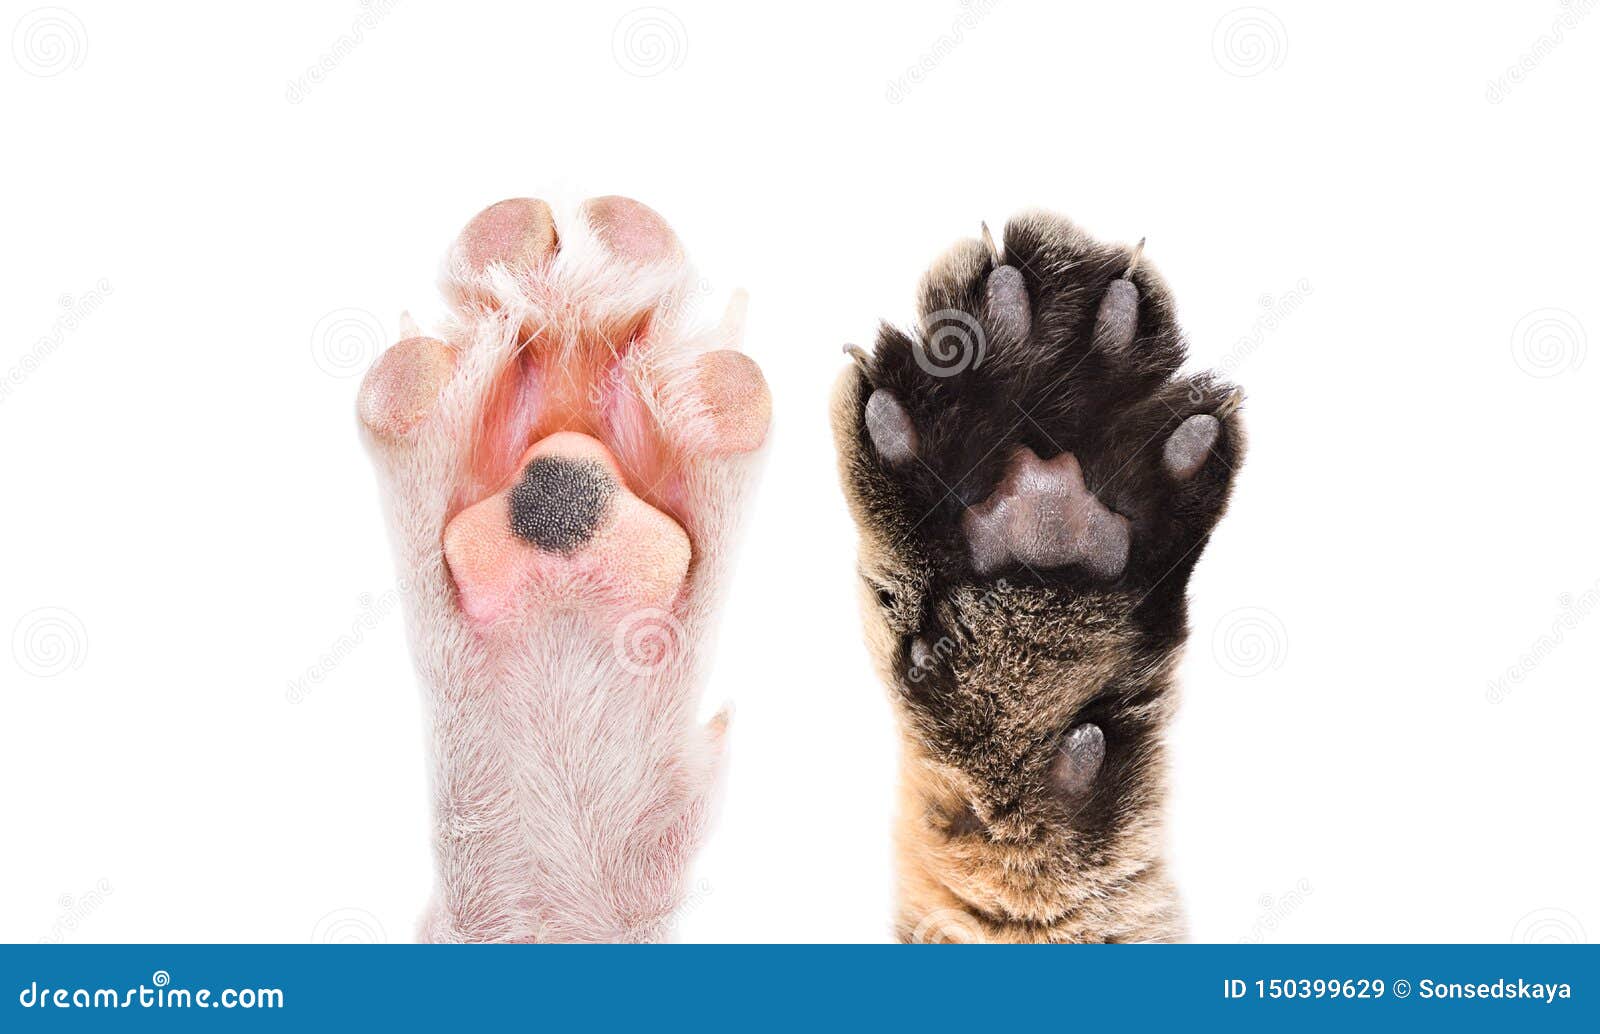 Cat Paws Vs Dog Paws 